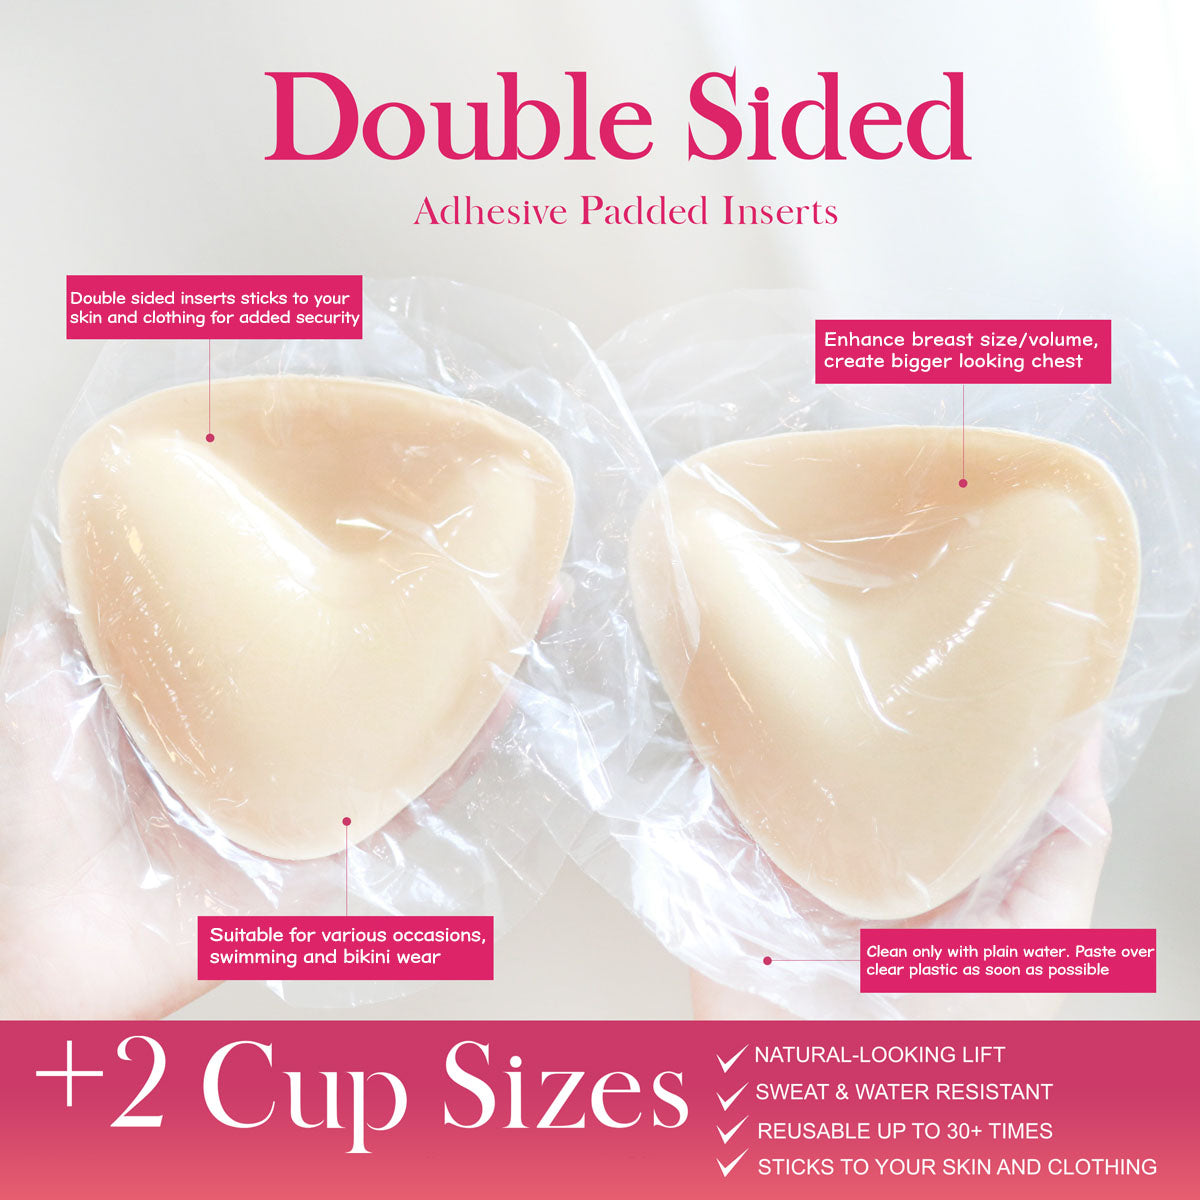 Wholesale double sided sticky bra inserts For All Your Intimate